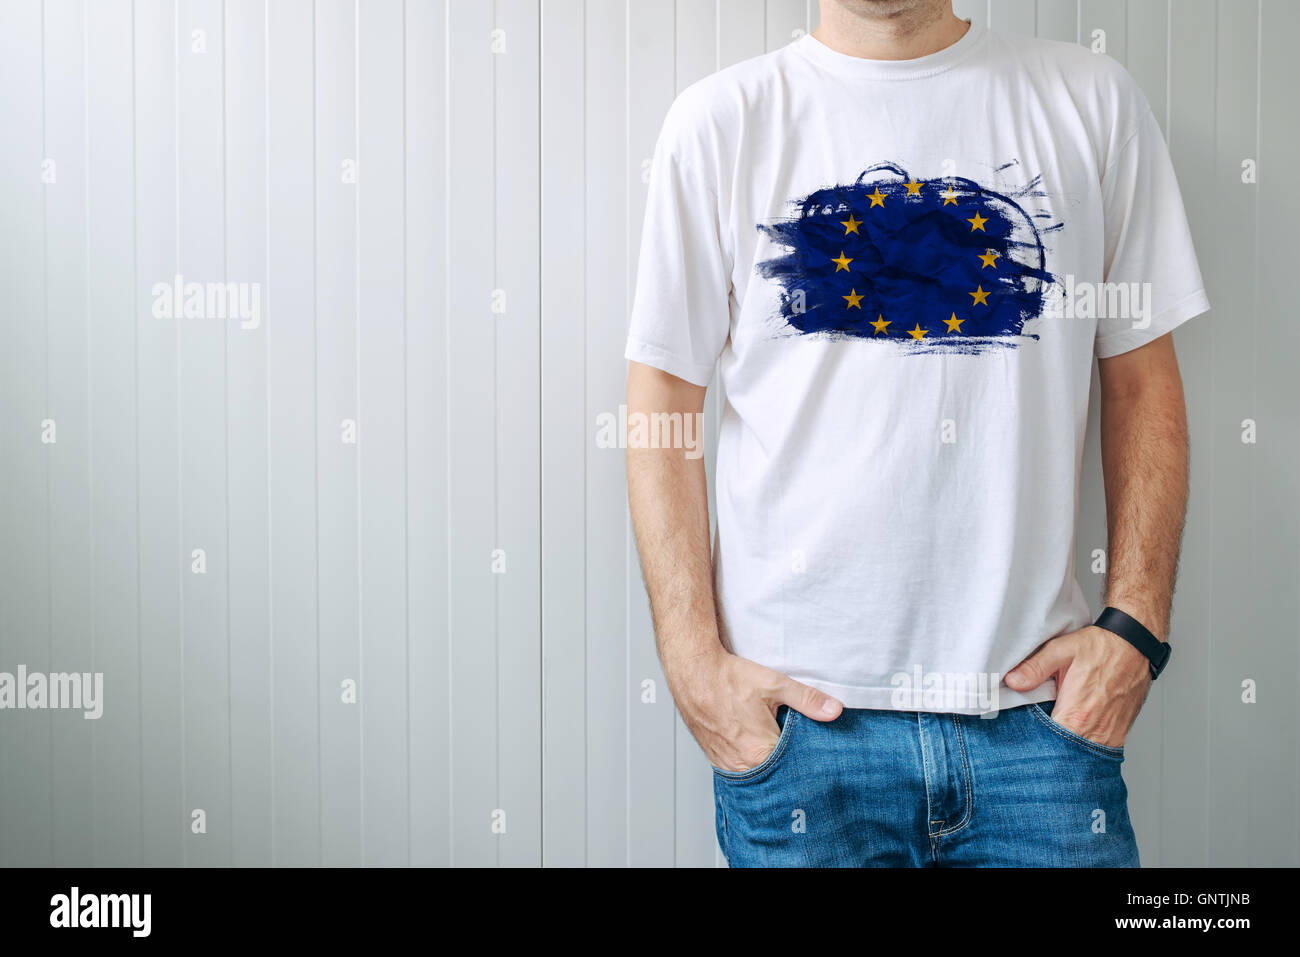 Man wearing white shirt with EU flag print, adult male person supporting European Union Stock Photo